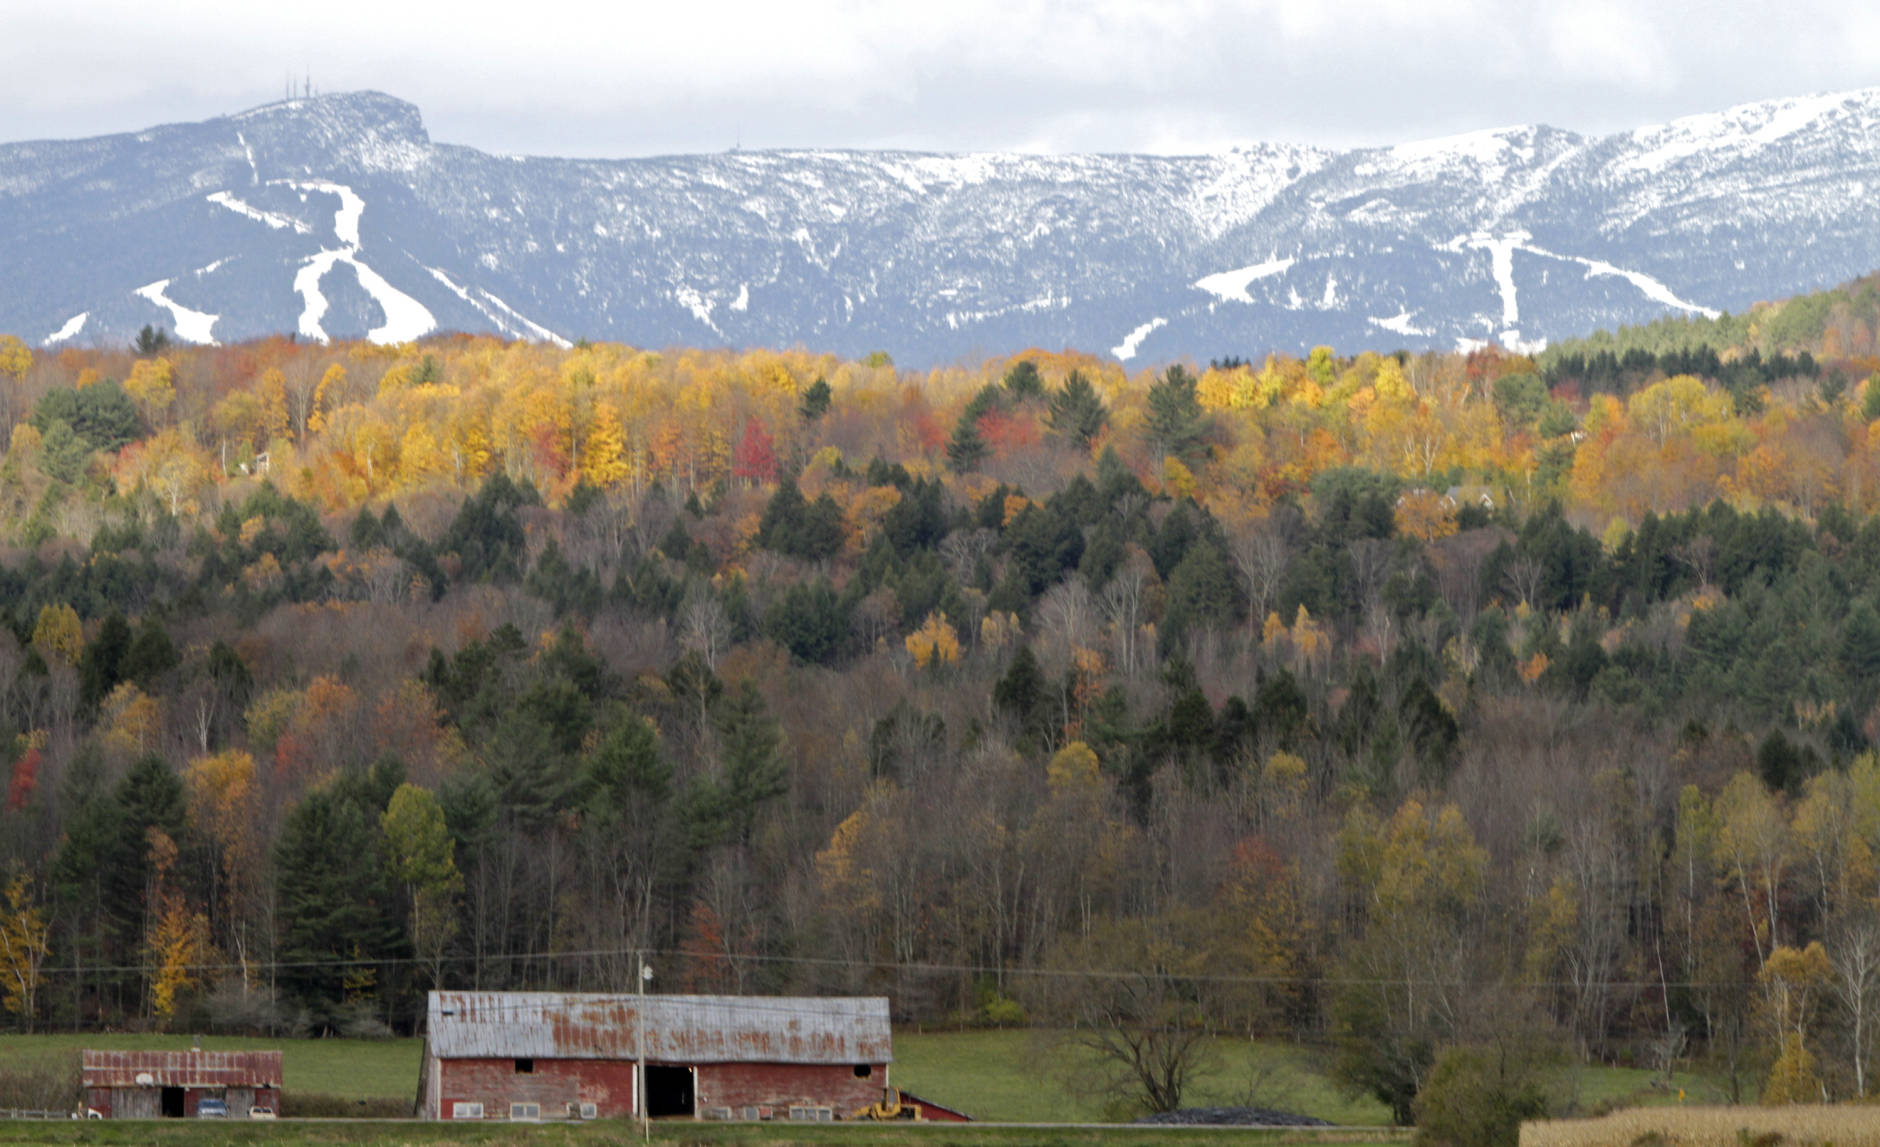 FILE-In this Oct. 18, 2010, file photo, sunlight falls on remaining bright foliage as the snow capped ski trails of Stowe ski resort are seen on the side of Mt. Mansfield in Stowe , Vt. Mountain and lake views along with fall foliage can be had for free in Vermont's largest city of Burlington, which feels more like a big town than a city. (AP Photo/Toby Talbot)